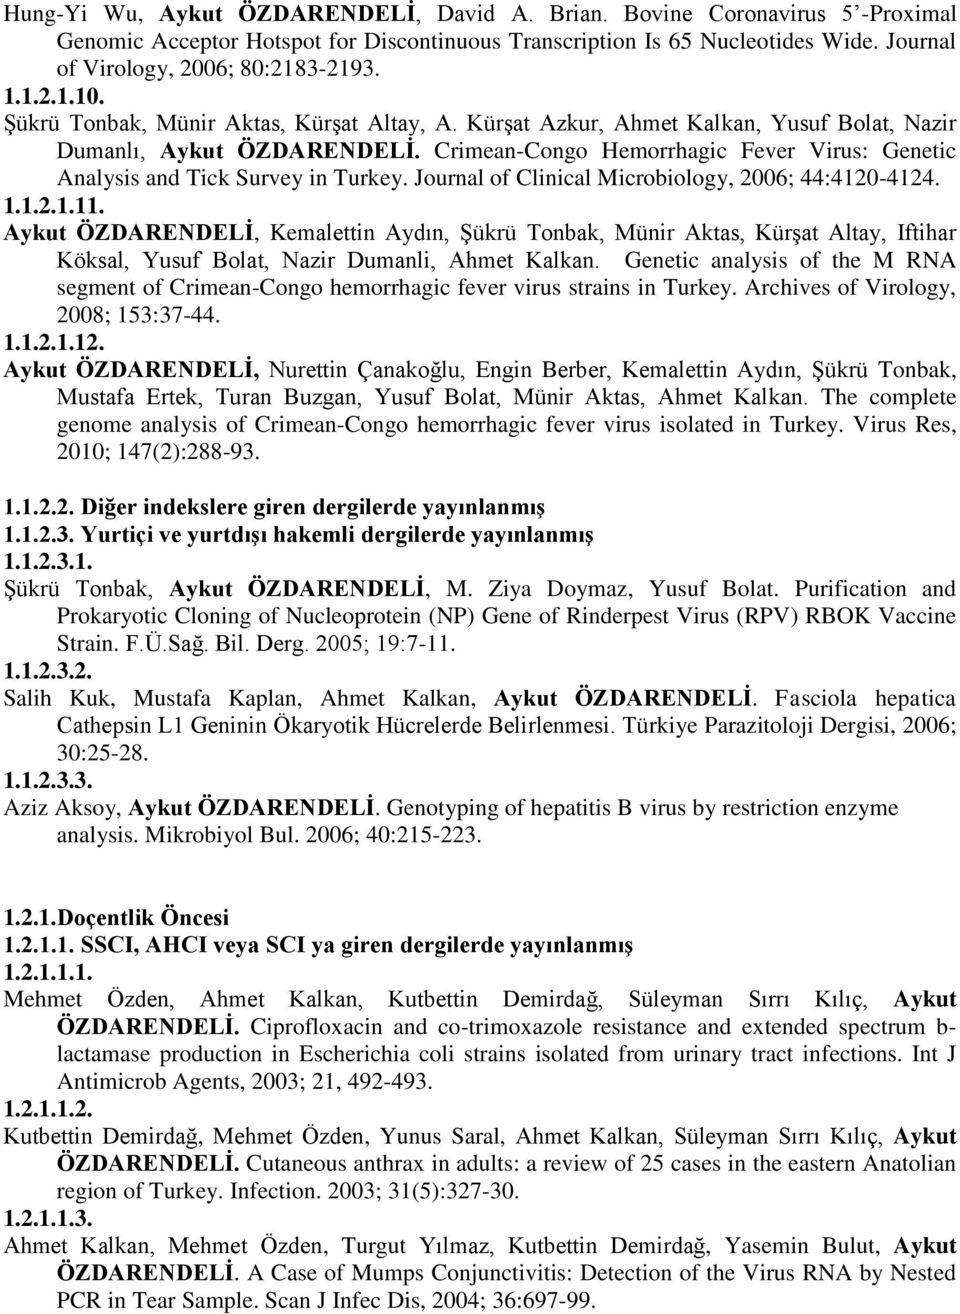 Crimean-Congo Hemorrhagic Fever Virus: Genetic Analysis and Tick Survey in Turkey. Journal of Clinical Microbiology, 2006; 44:4120-4124. 1.1.2.1.11.